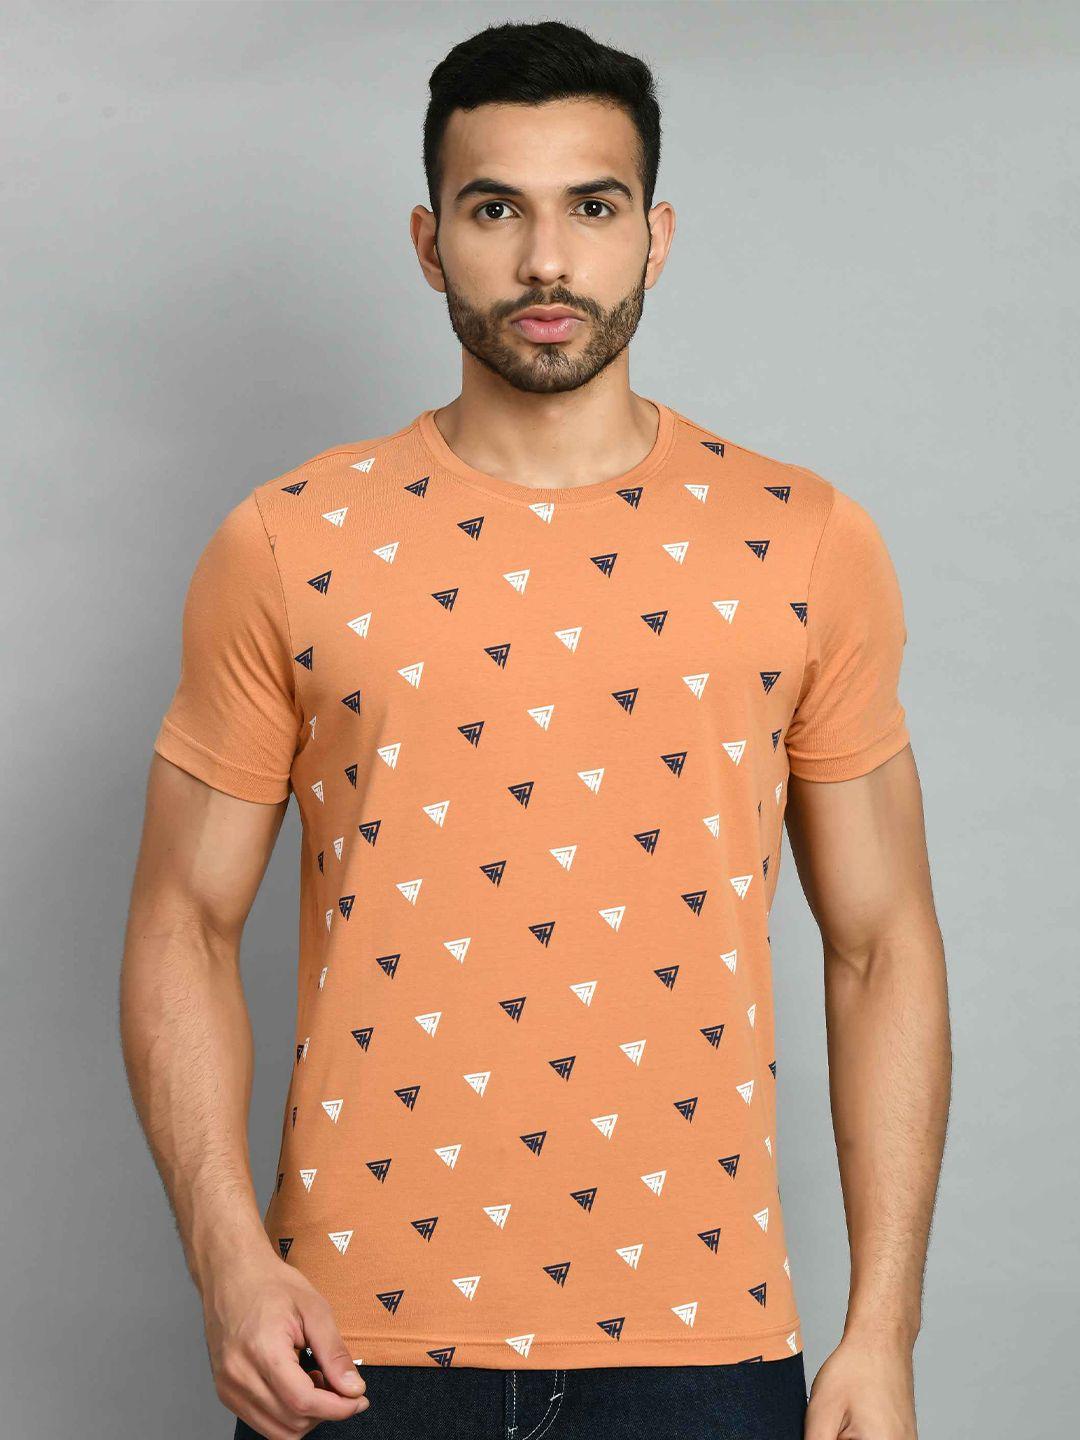 squirehood geometric printed round neck pique cotton casual t-shirt